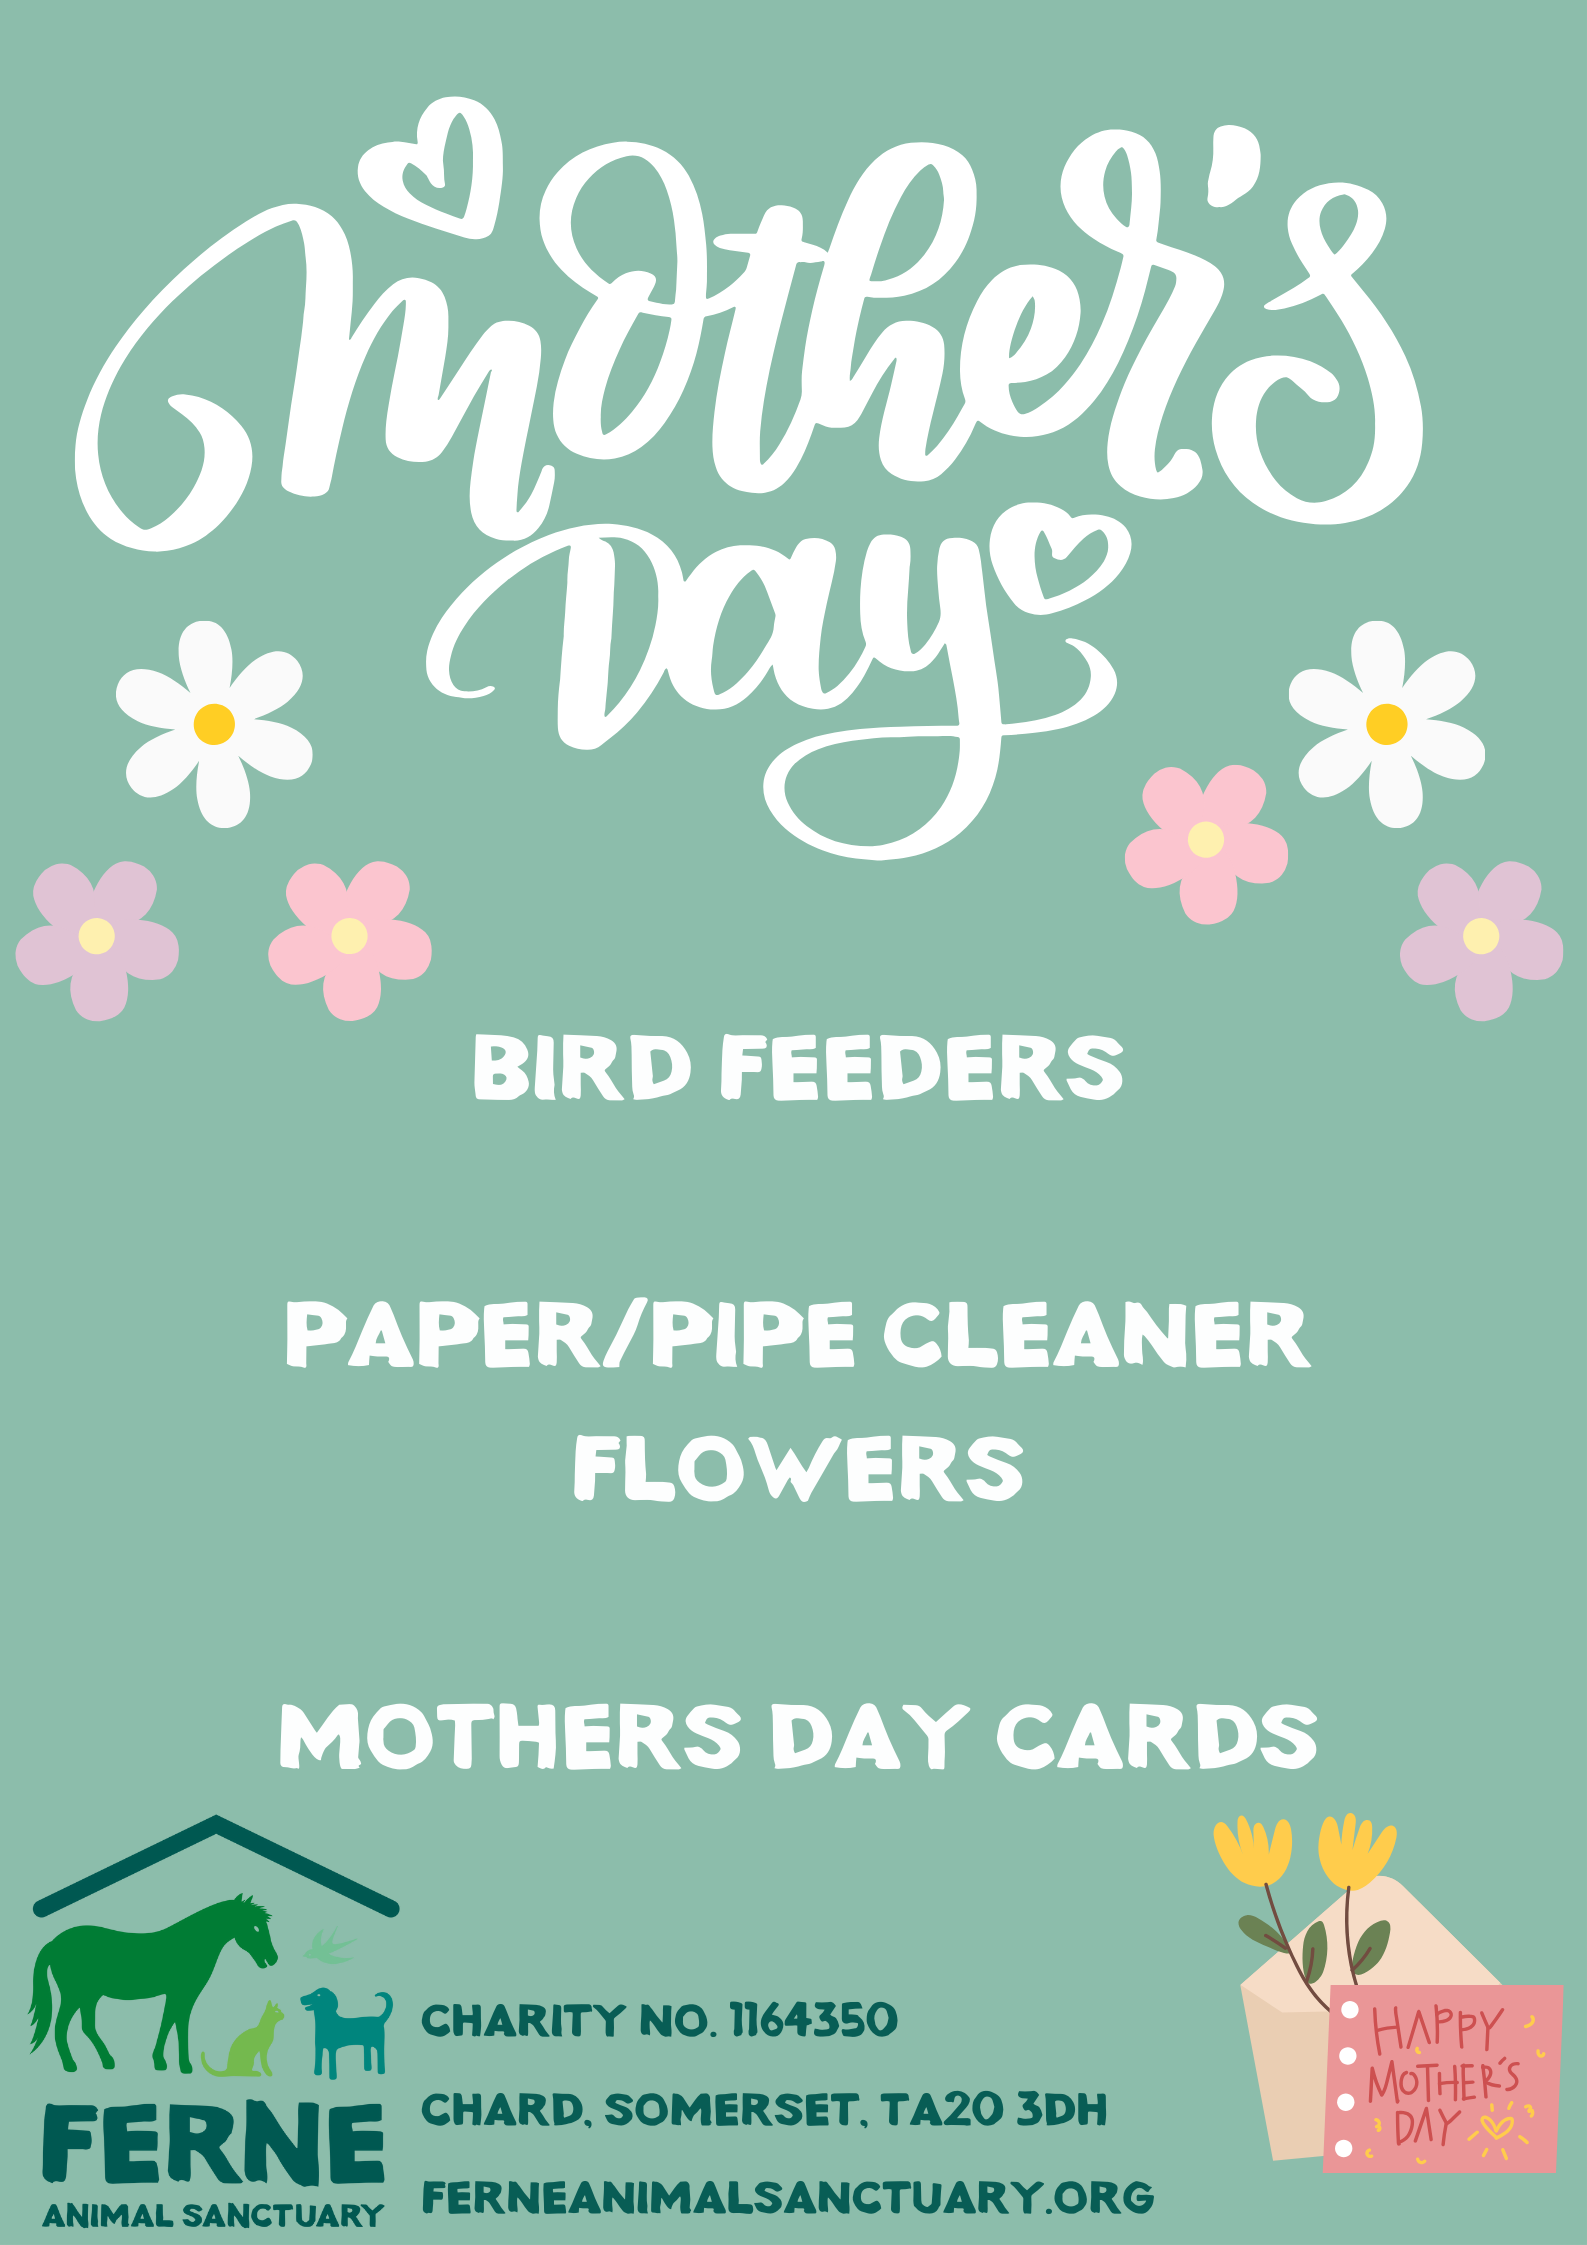 Mother’s Day at Ferne